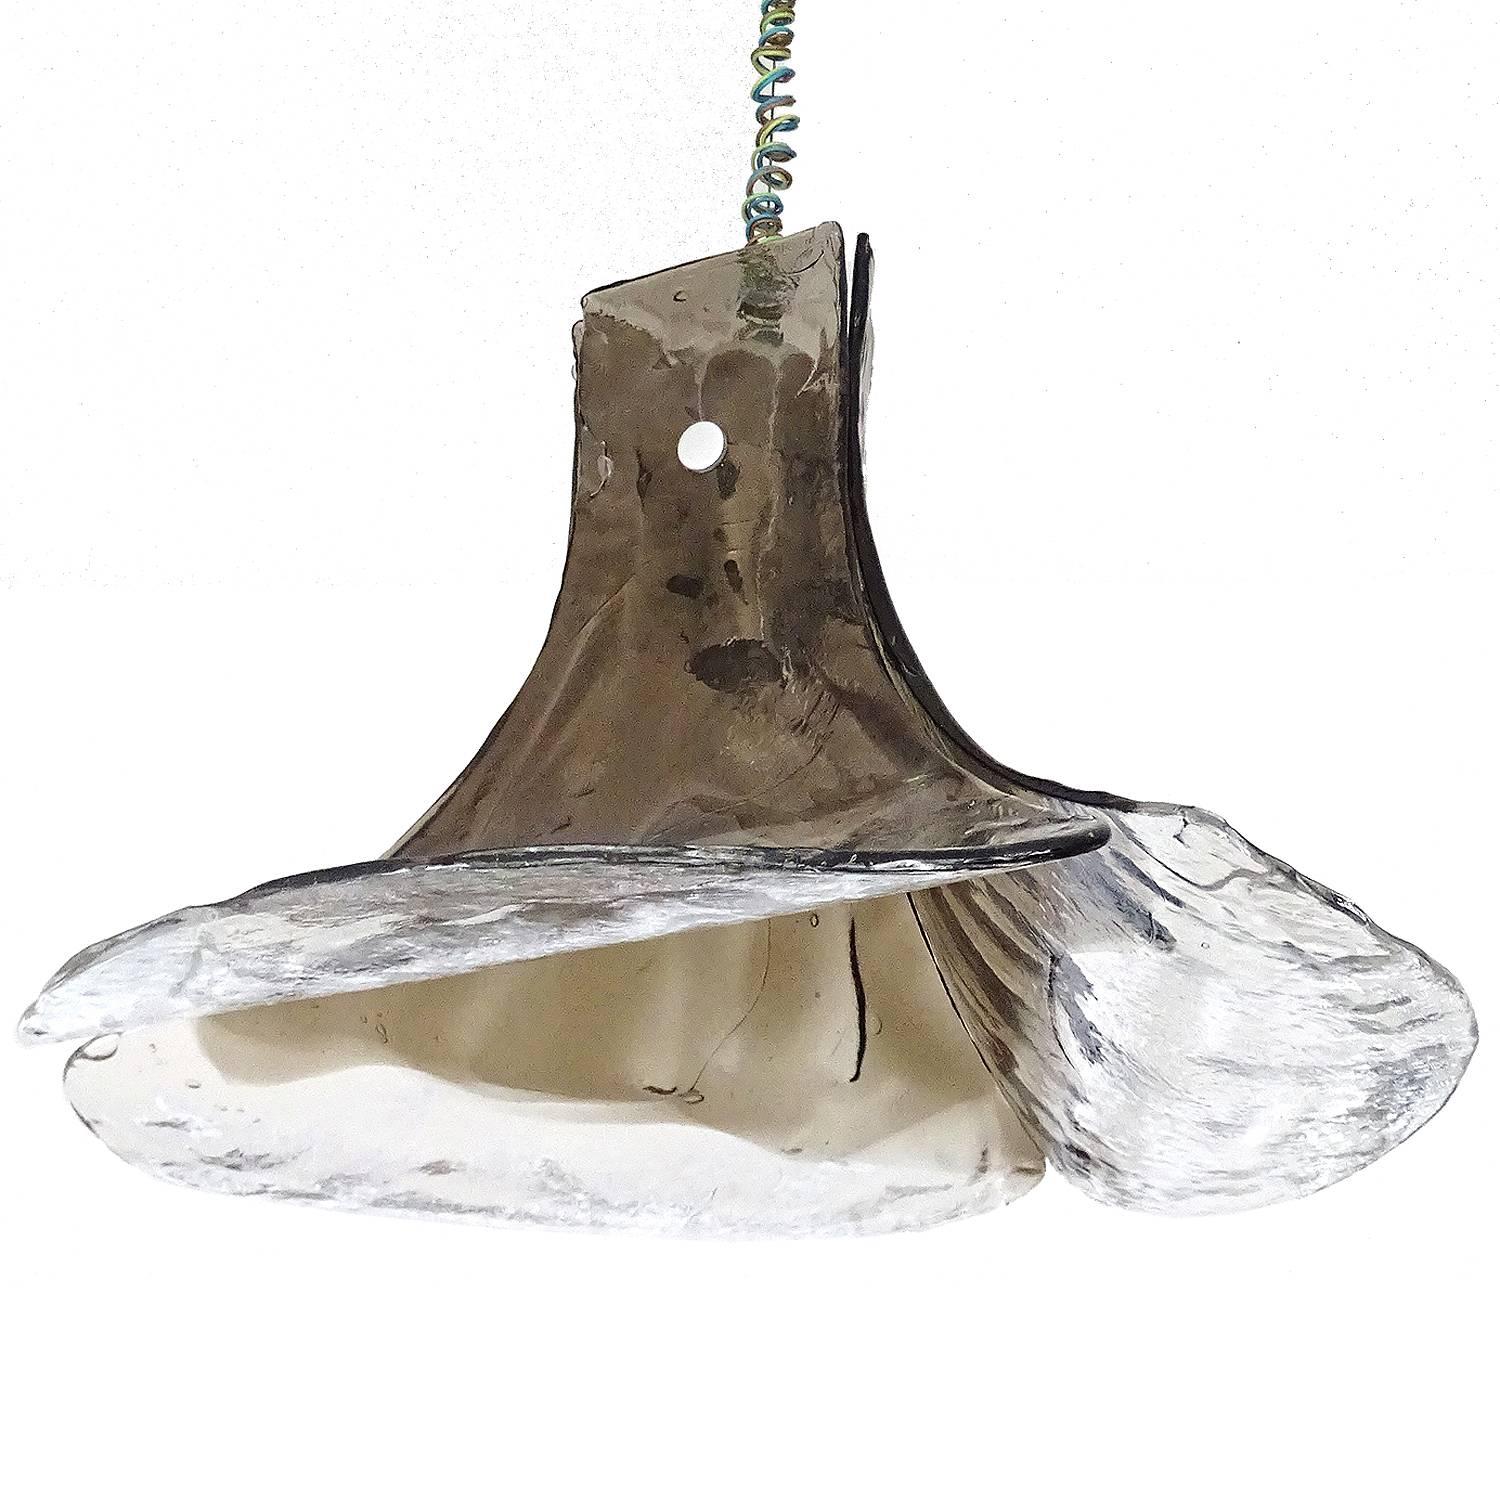 Pendant lamp model ‘LS 185’ by Carlo Nason for Mazzega. It consists of four handmade pieces of thick Murano glass, suspended from a metal hanging frame, flaring outwards at the bottom to simulate the shape of a flower. The color at the top of the